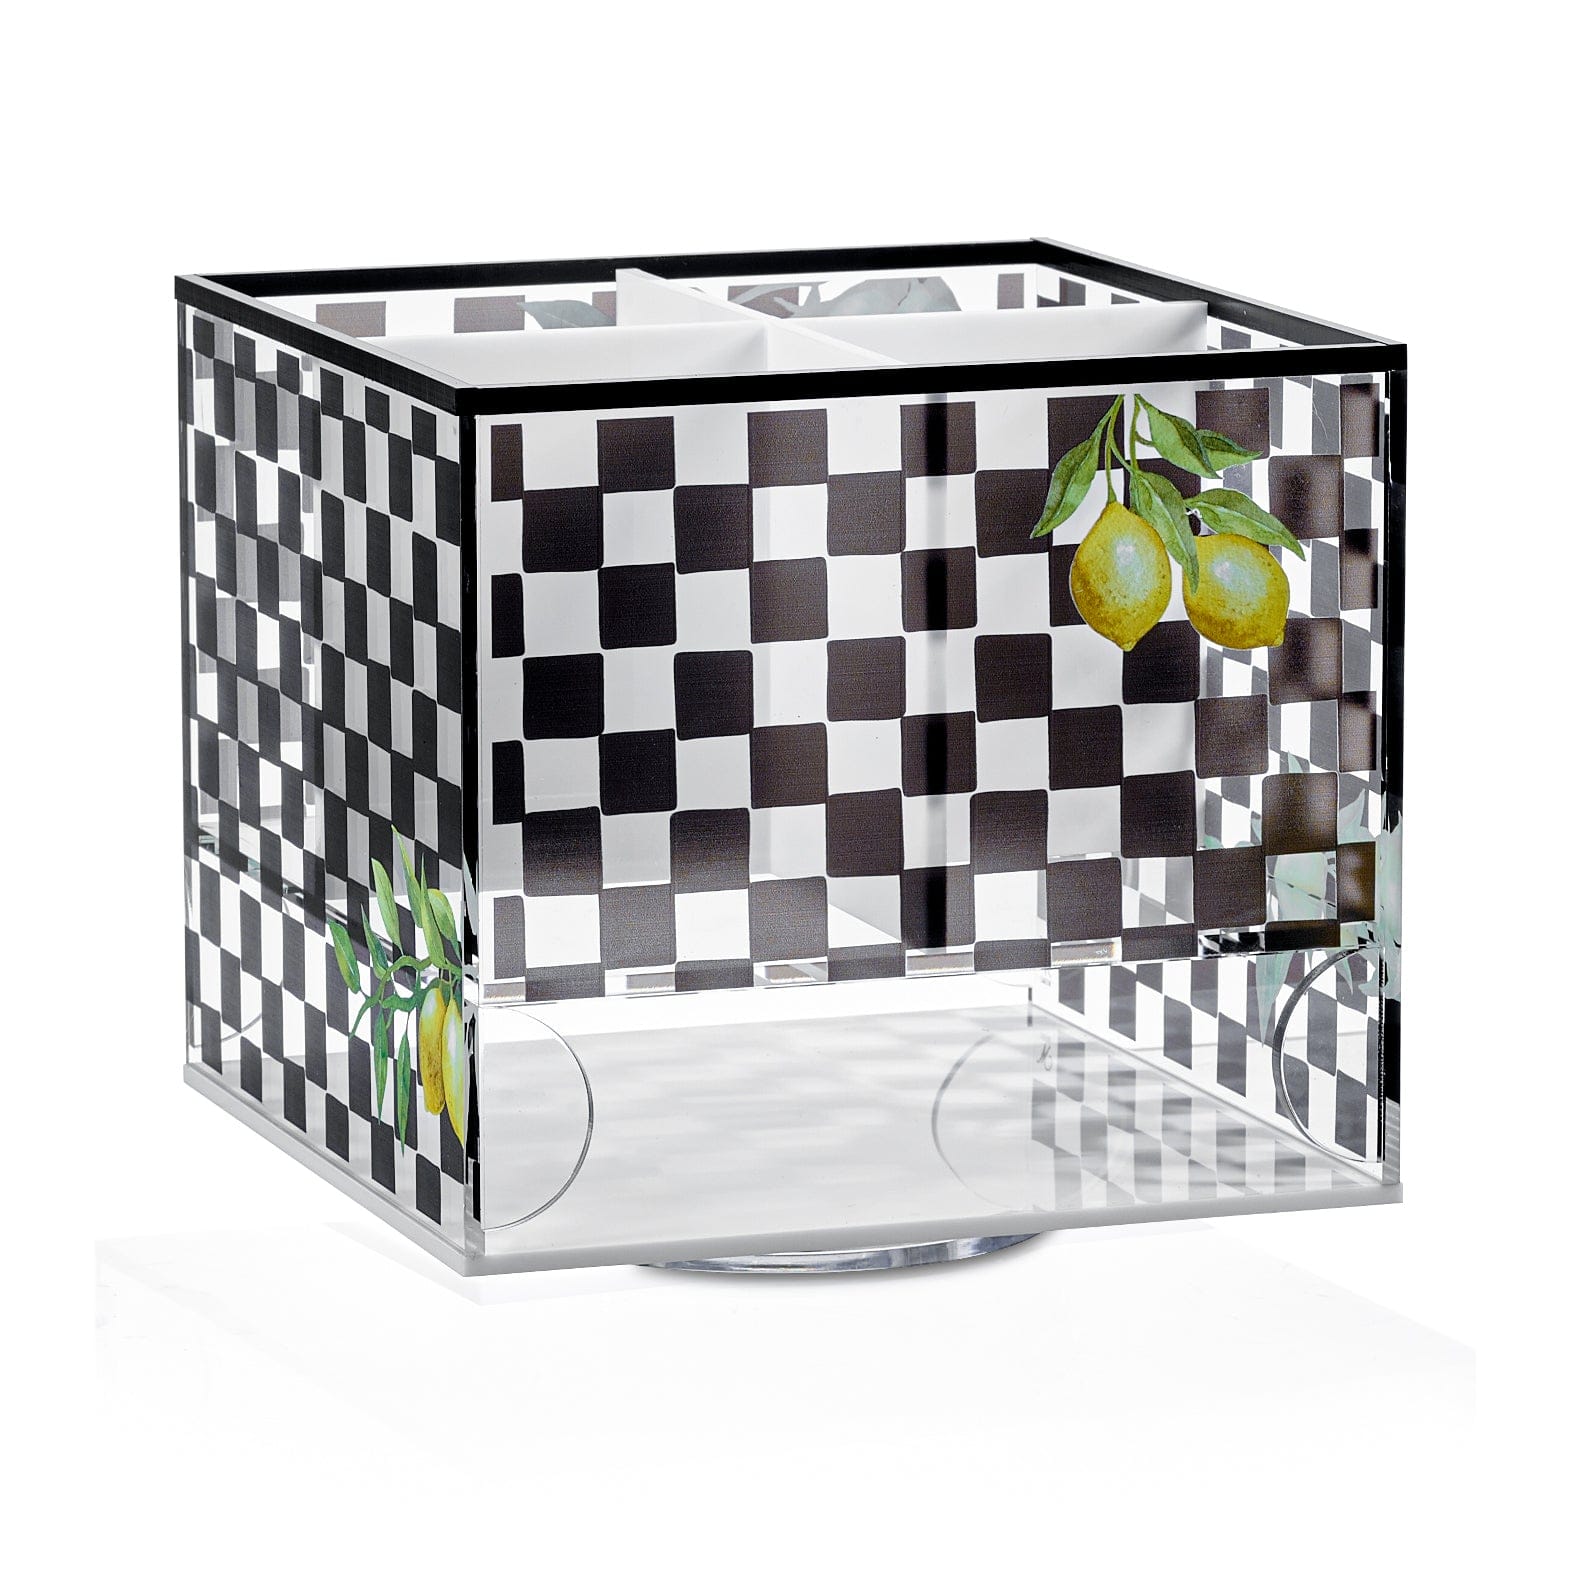 Onyx Swivel Silverware Caddy - Waterdale Collection